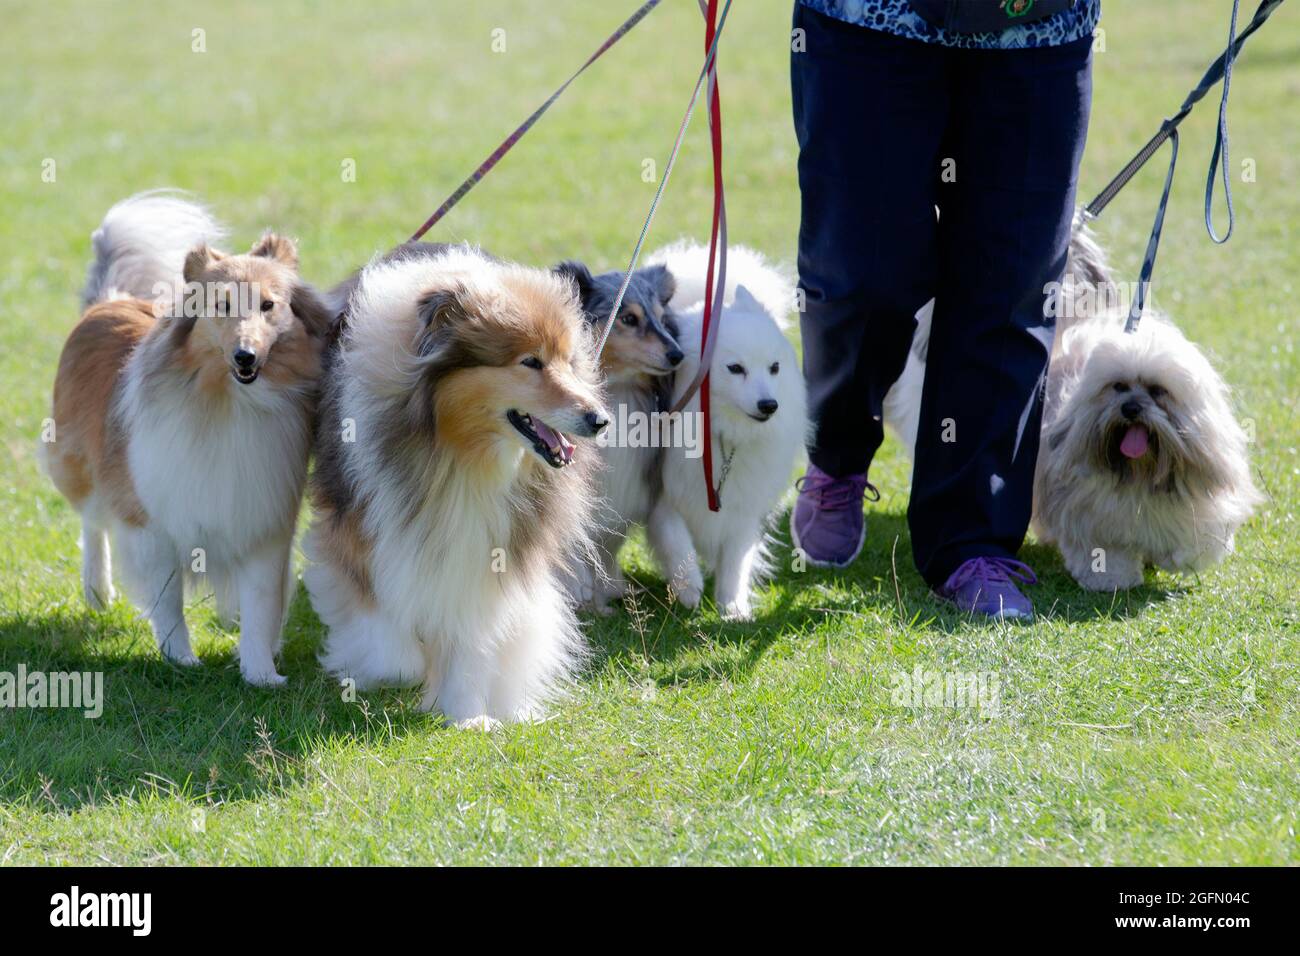 A member of the Caring Canines school team walks with her 2 sheltie, collie, spitz and 2 Lhasa dogs at Dogstival, a festival for dogs and dog lovers a Stock Photo